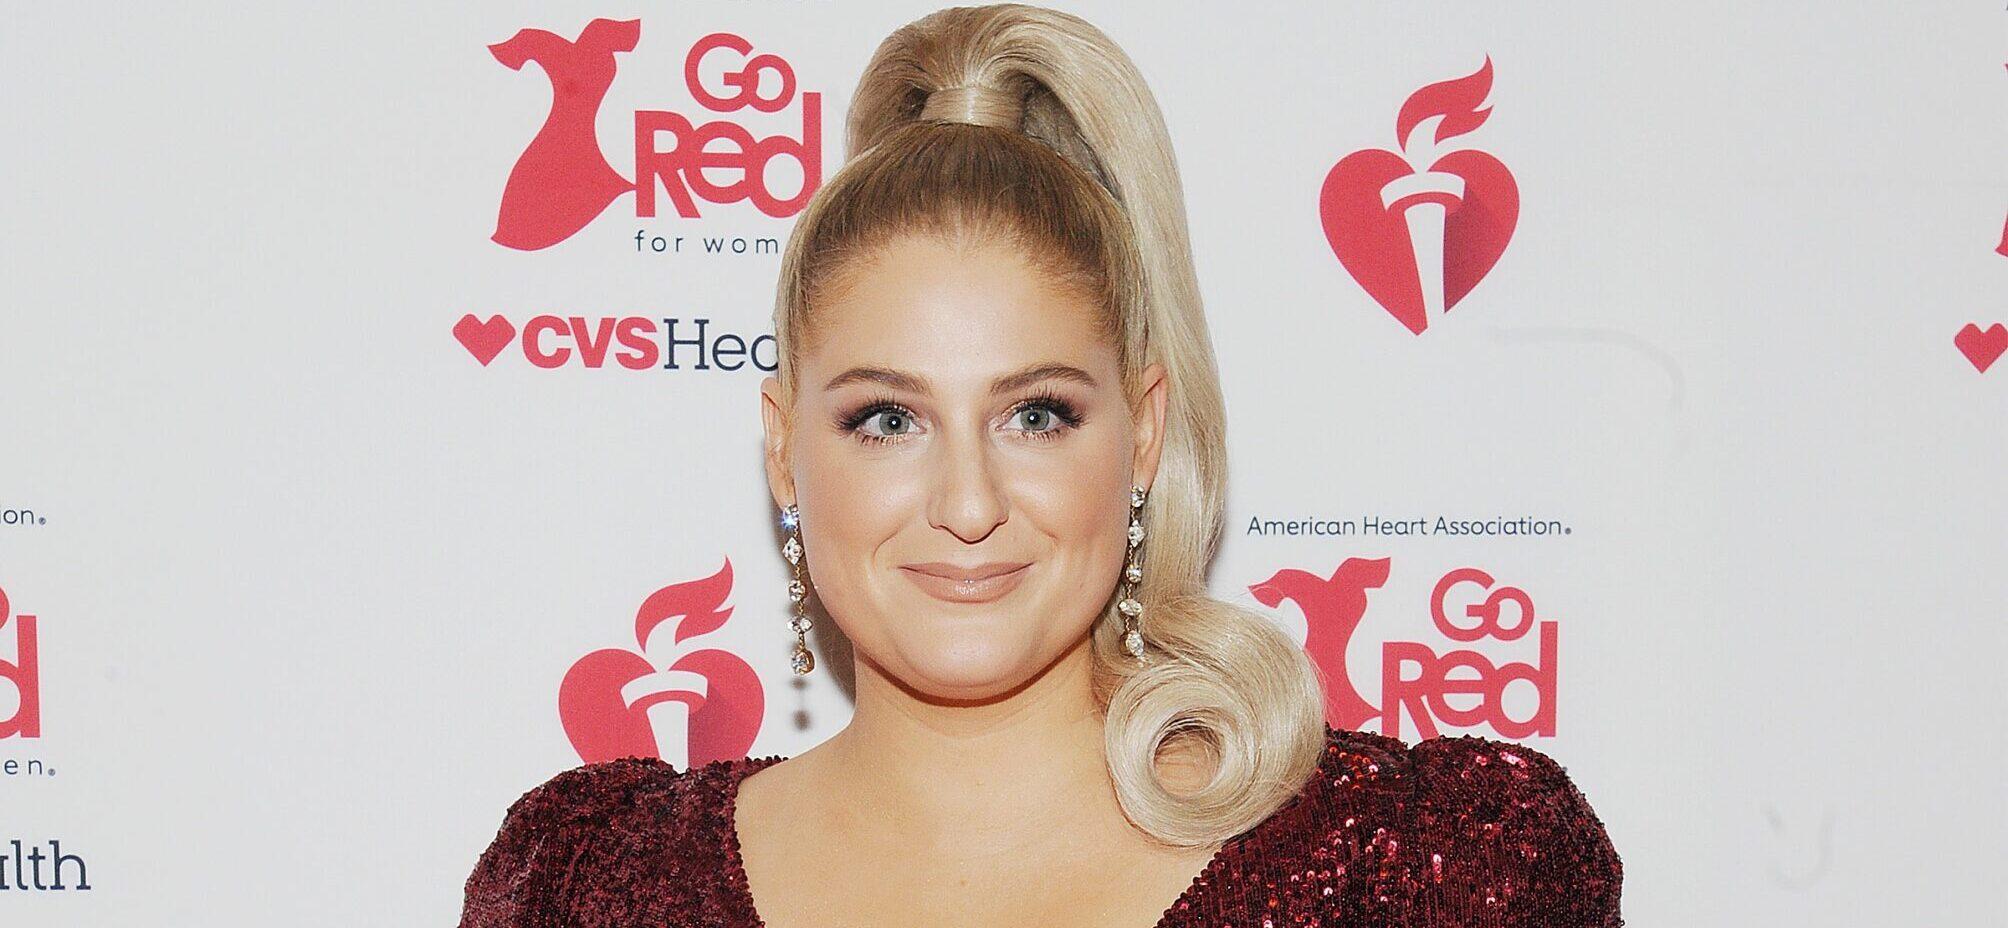 Meghan Trainor Recently Opened Up About Her Journey To A Healthy Body Image